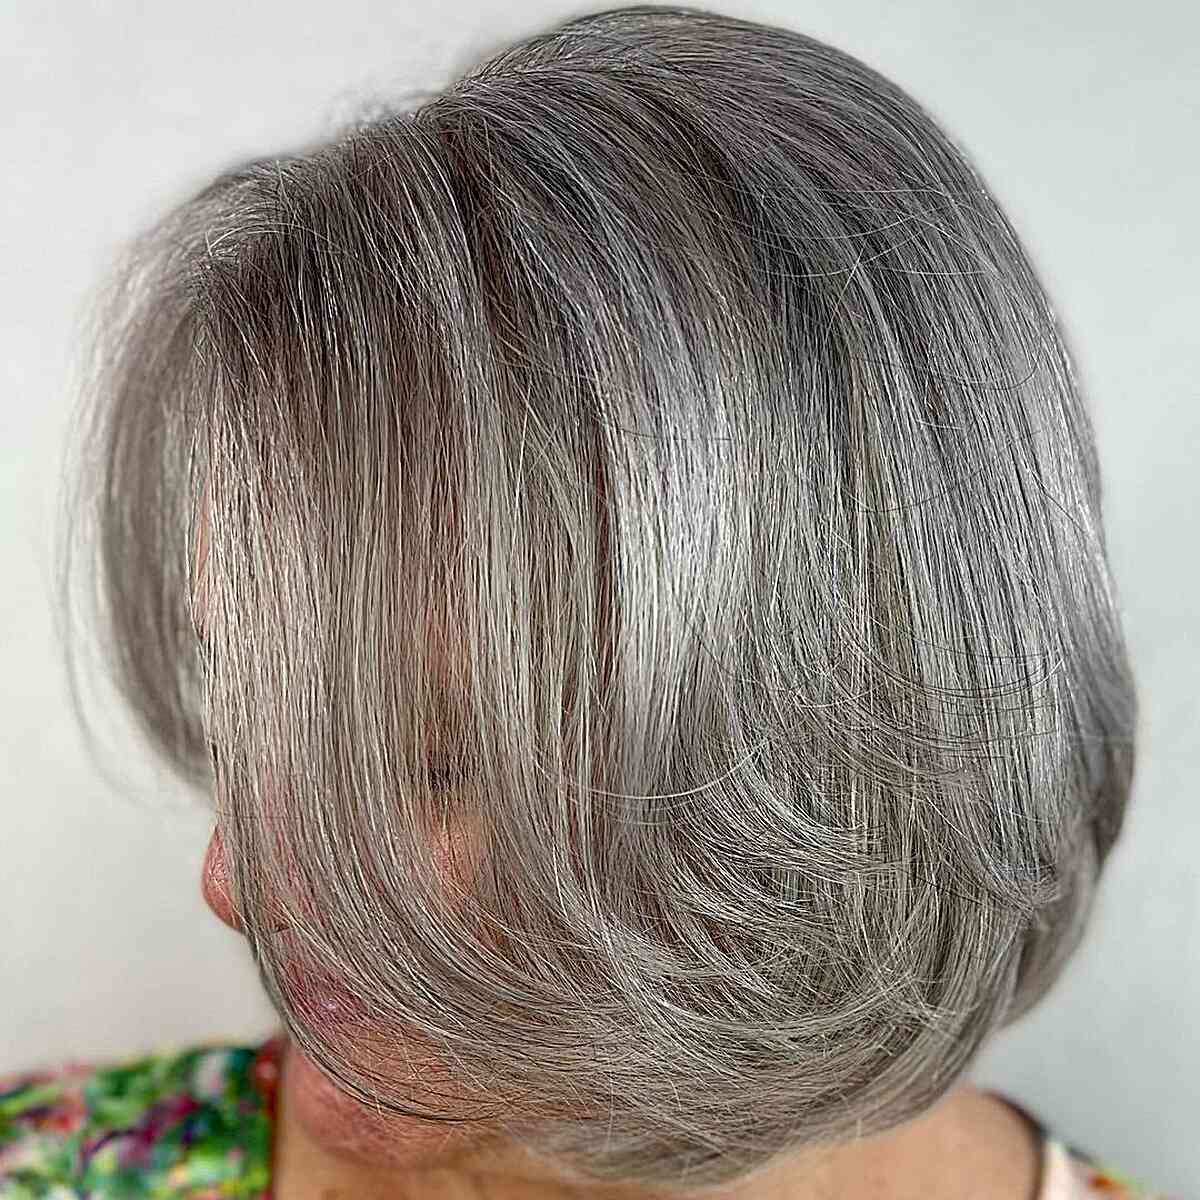 High volume lob with layering for over 50 year old women